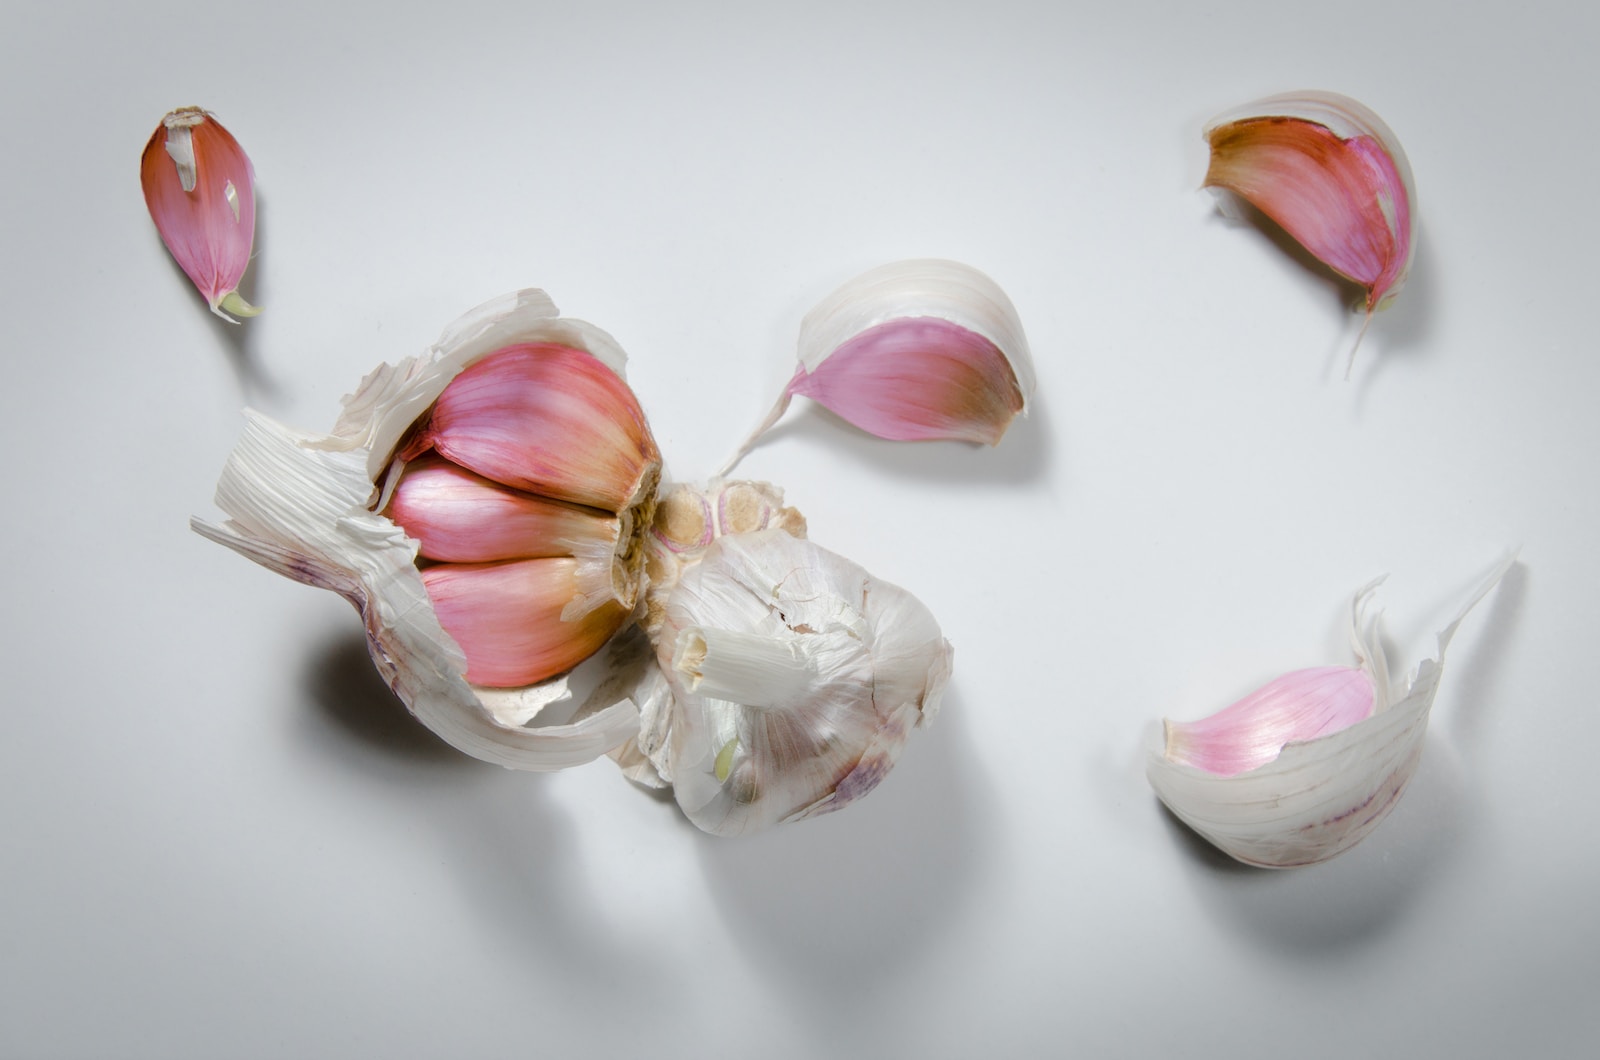 white and pink garlic on white surface